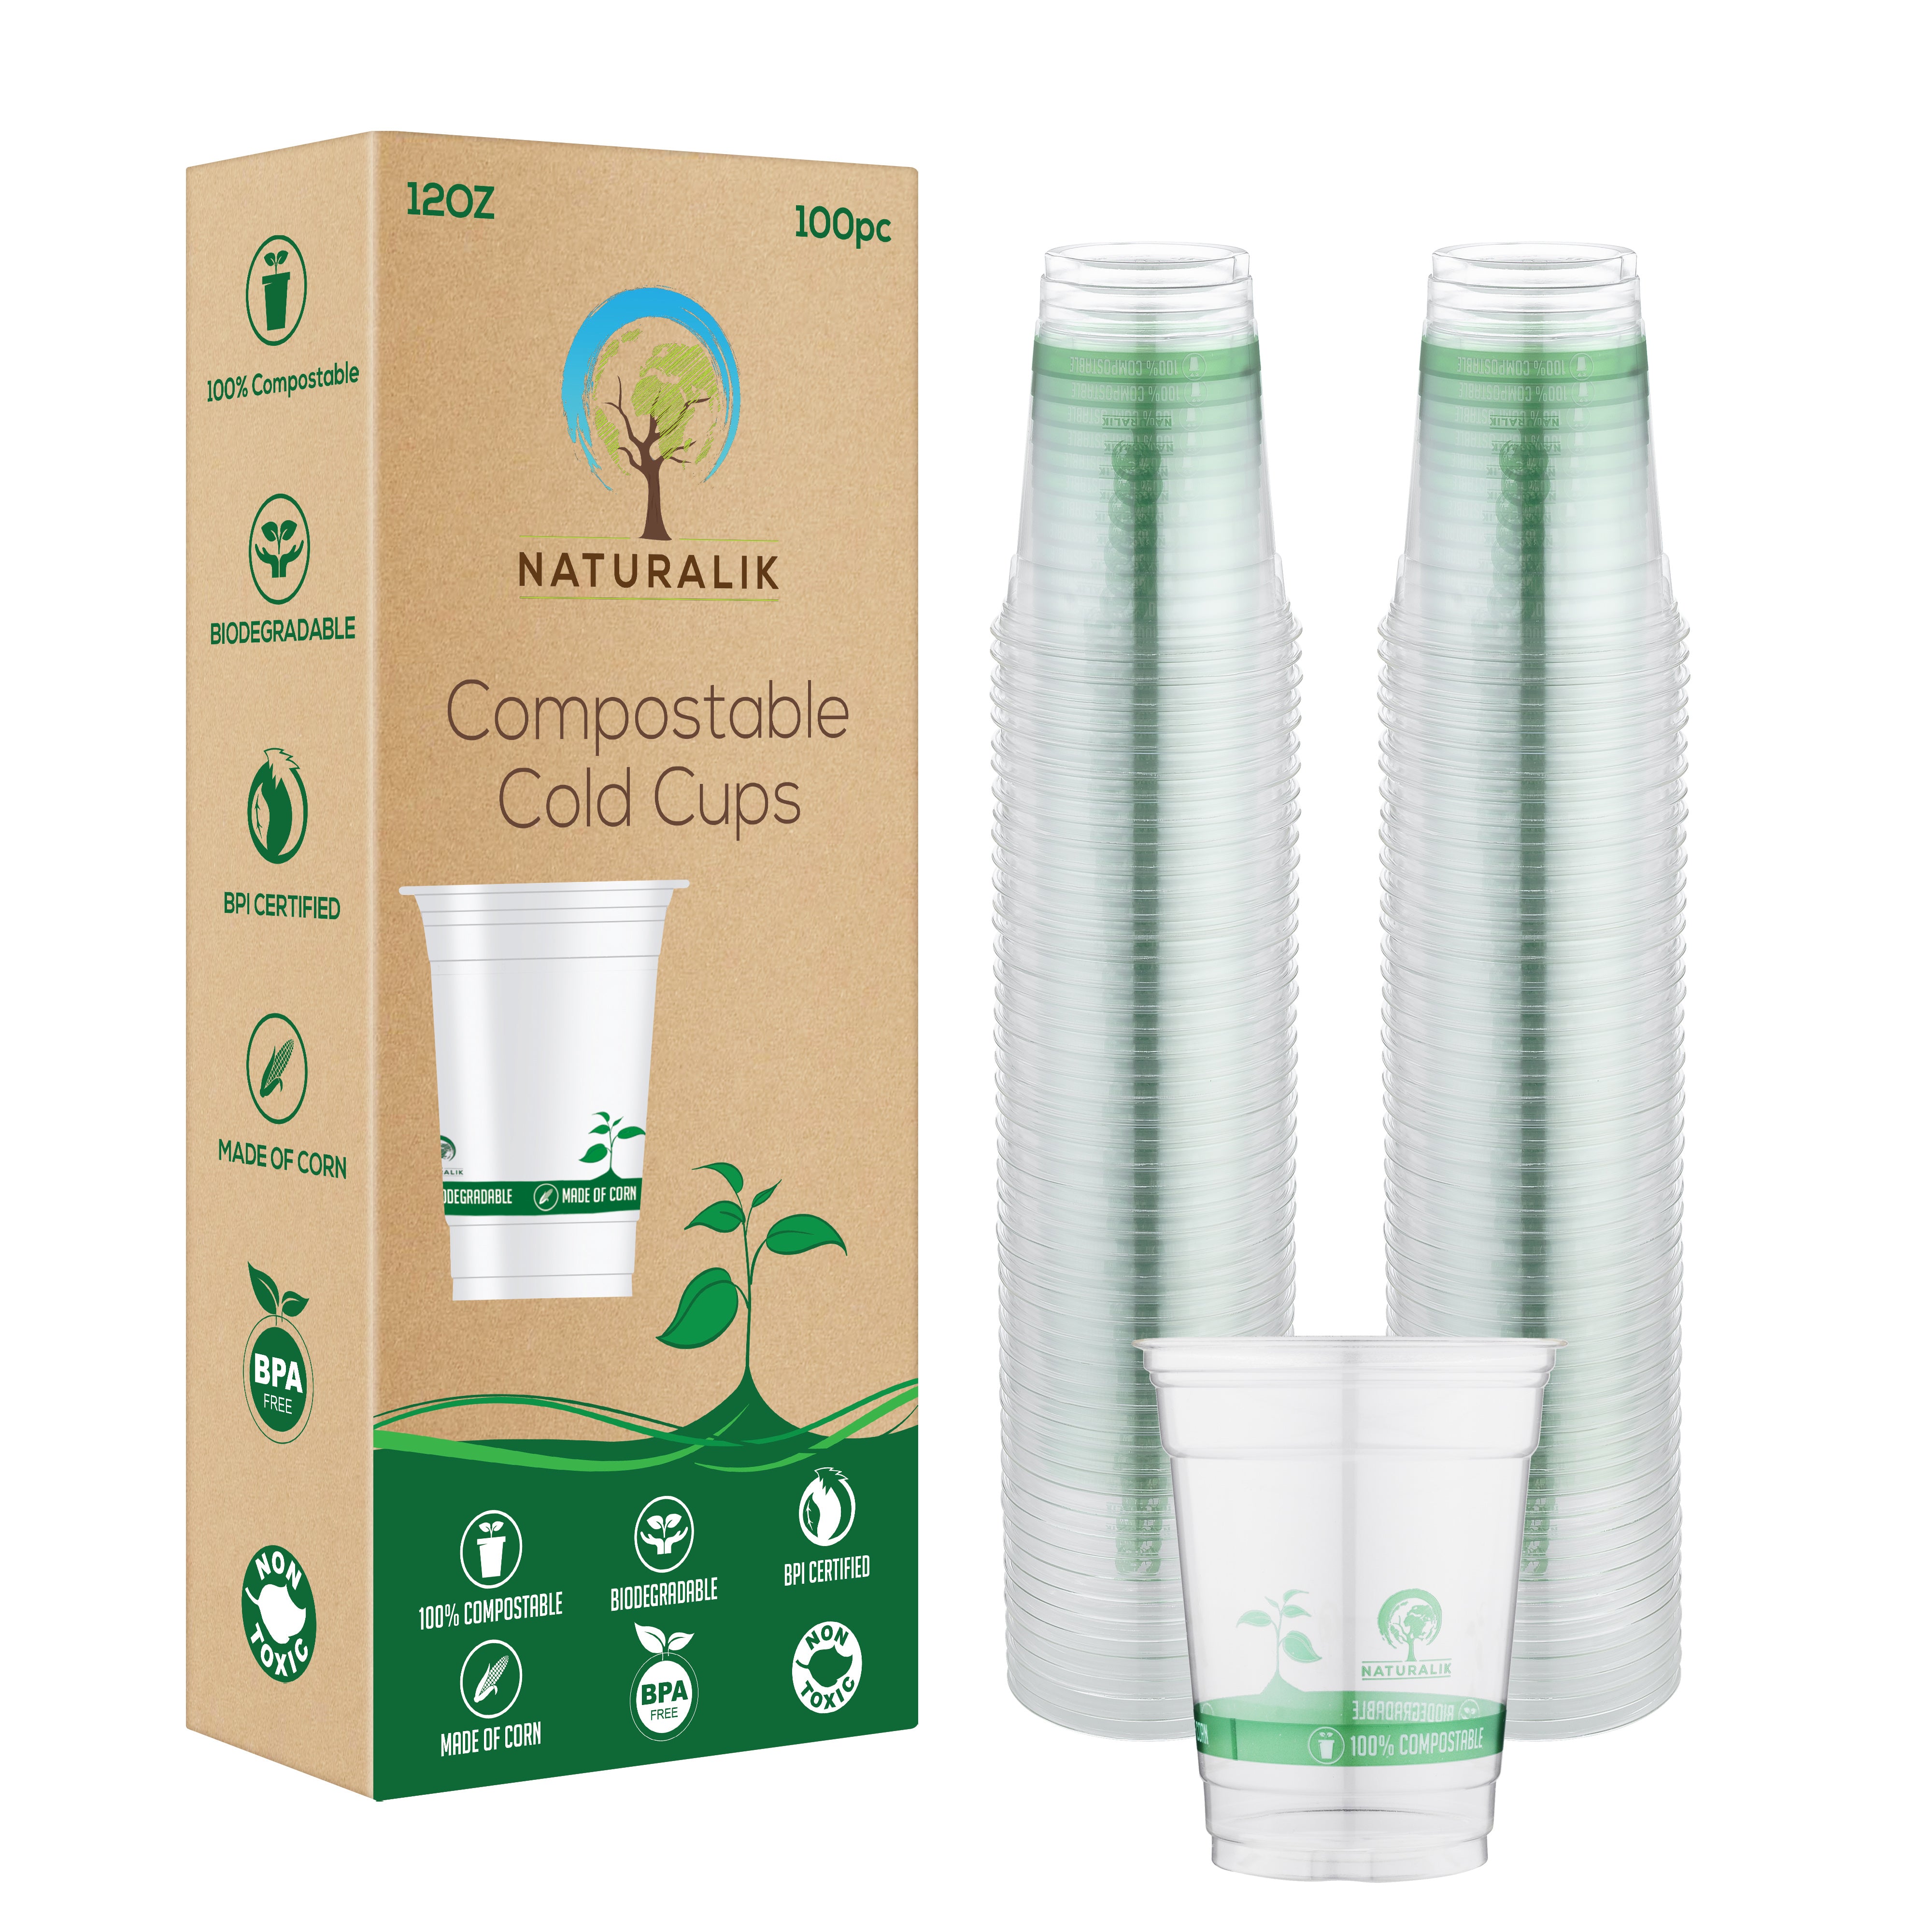 GREENER SETTINGS 12 oz. Clear Compostable Disposable Cups, Cold